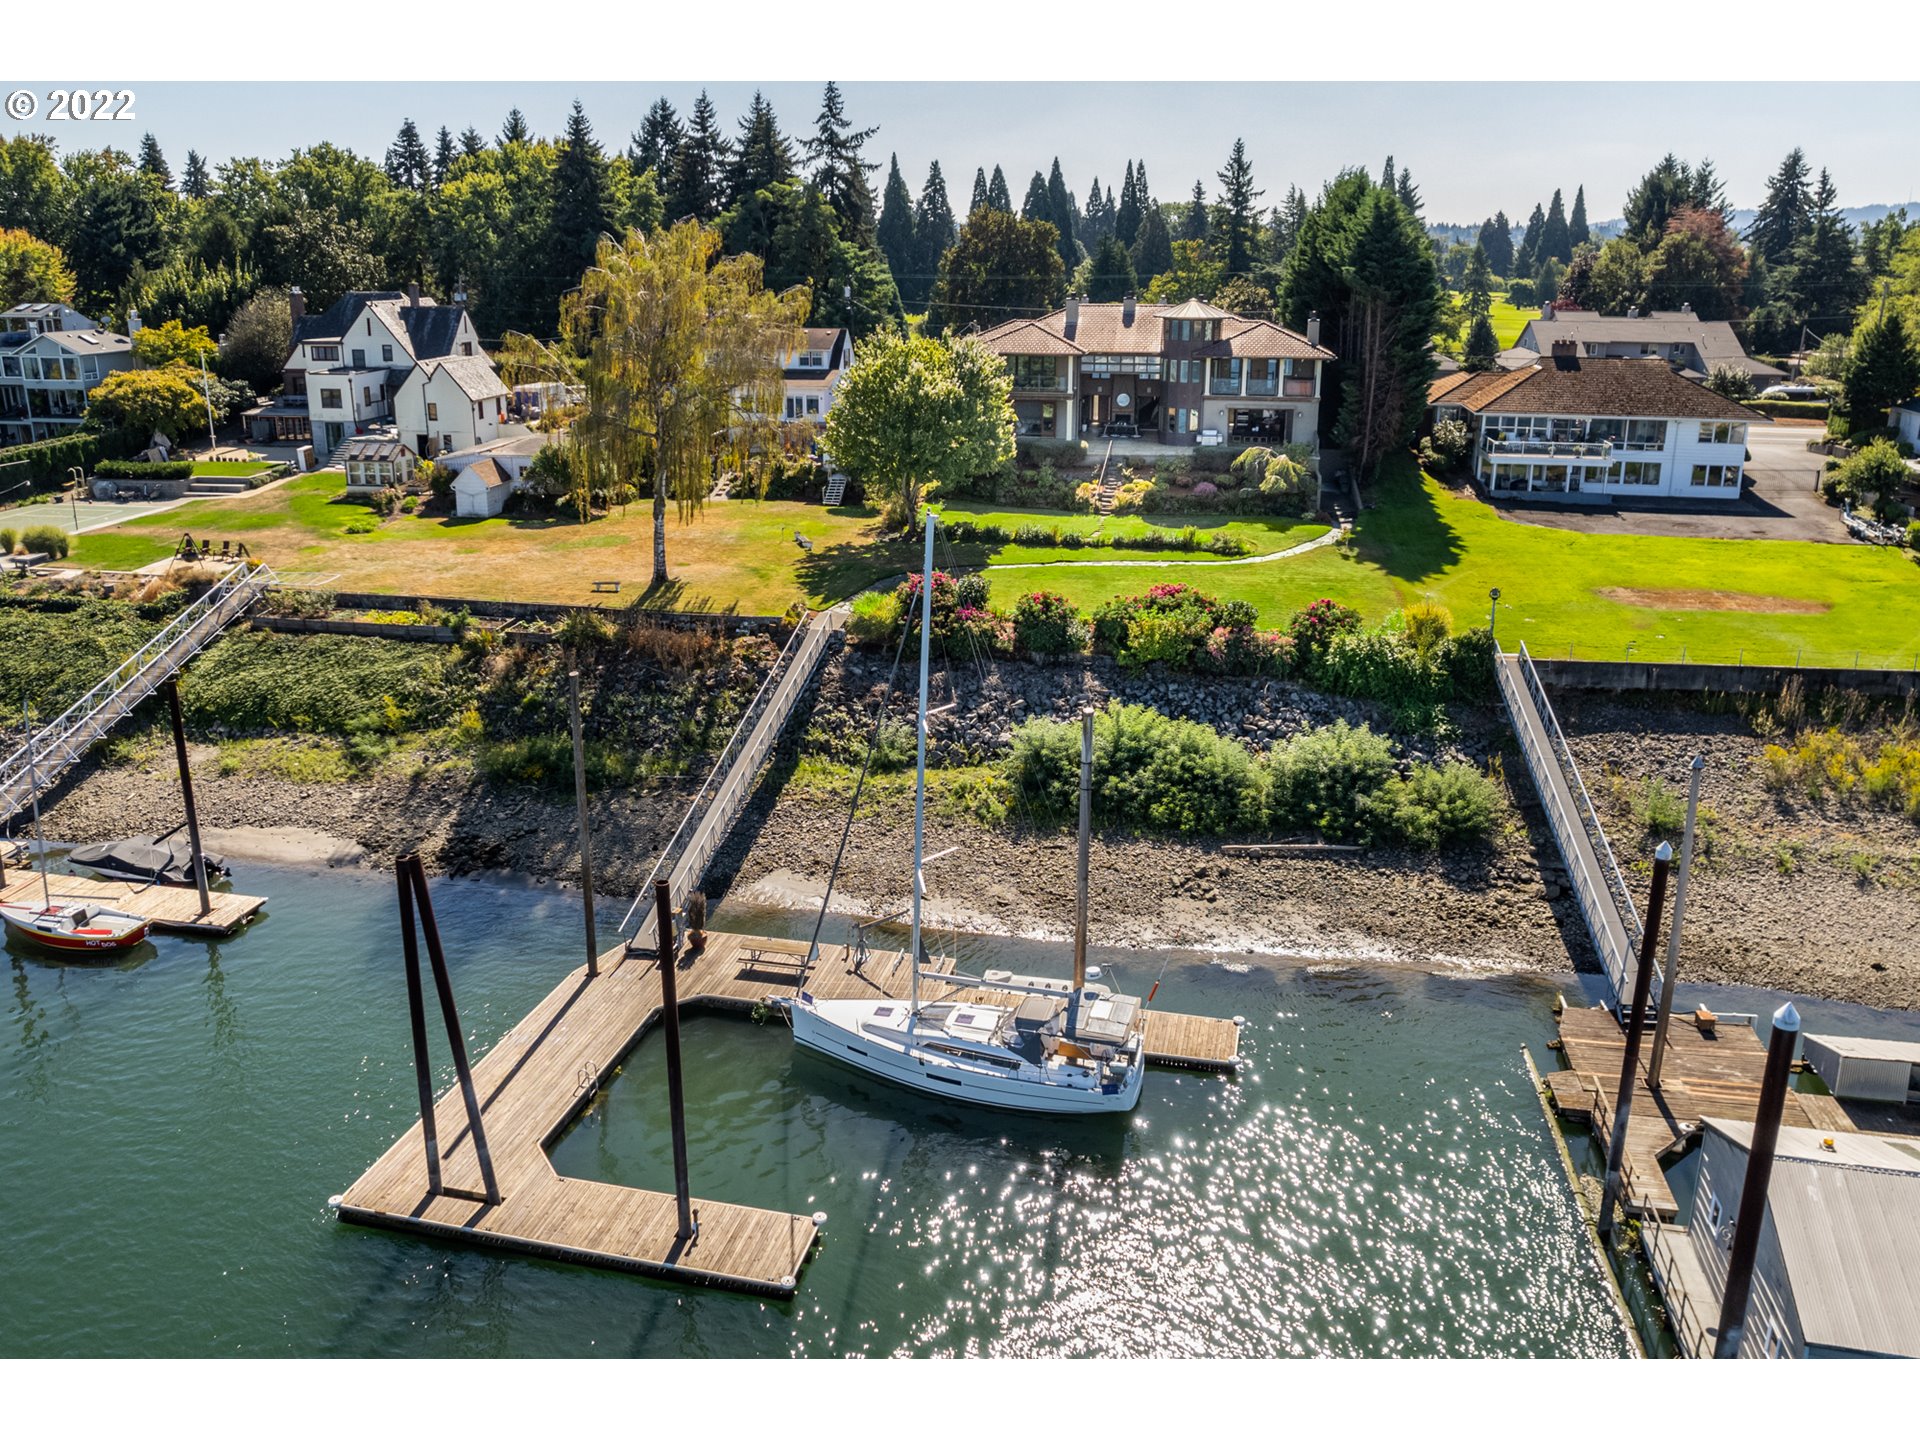 Custom built, steel framed 5 Beds/5.5 Baths. 6310 SqFt of Living Space, 2380sqft of Garage/Shop w/heated, epoxy floors & built-in cabinets. Side roll-up garage door for easy access to lawn & boating equipment storage. 2 EV car charger outlets. Steel enforced boat dock can accommodate 60-foot yacht plus multiple smaller boats & water toys. Includes 1,500 lbs crane lift, water, power, WiFi cable TV & house phone lines at dock. Two 50 amp/250 volts hookups for powering yachts. Dock rope light, 75-foot ramp with LED lights. Elevator access for 3 levels of living. Chefs kitchen w/twin Wolf gas/convection ovens, Wolf 6 burner 16k BTU gas cooktop w/griddle and pot filler, full size Sub-Zero refrigerator, warmer drawer, twin Bosch stainless steel dishwashers, prep sink w/disposal, pull-out garbage & recycle bins, large, air-conditioned pantry. Heated slate floors. Folding glass accordion wall system extends 850 square feet connecting the greatroom to outdoor living. Quarter sawn solid cherry wood cabinets. Main floor laundry/mud/prep room w/refrigerator/freezer, full bath, and side access doors. Outdoor/Indoor living space w/striking wood fireplace w/pounded iron custom surround, floating wood mantel and 20ft glass roll up door. Media/Game room w/custom Bathos Studios glass bar w/marble counters, Sub-Zero under-counter fridge/freezer, sink w/disposal, Bosch dishwasher, gas fireplace & heated, distressed wood floors. Primary suite glass tile spa bath w/Mr. Steam shower, heated travertine floors & under vanity lighting. Marble countered dual vanity w/heated mirrors. Coffee/bar nook w/Sub-Zero under-counter frige/freezer. Reinforced steel deck off primary bath w/private hot tub, 400sqft closet w/built-in island dresser, cedar lining & washer/dryer. High-end rollout out Milgard windows throughout. 50-year tile roof. Custom hallway chandelier that lowers to the floor level for cleaning. Lutron quiet & remote-controlled blackout shades. Terraced landscaping w/sprinklers & more. [Home Energy Score = 3. HES Report at https://rpt.greenbuildingregistry.com/hes/OR10041133]